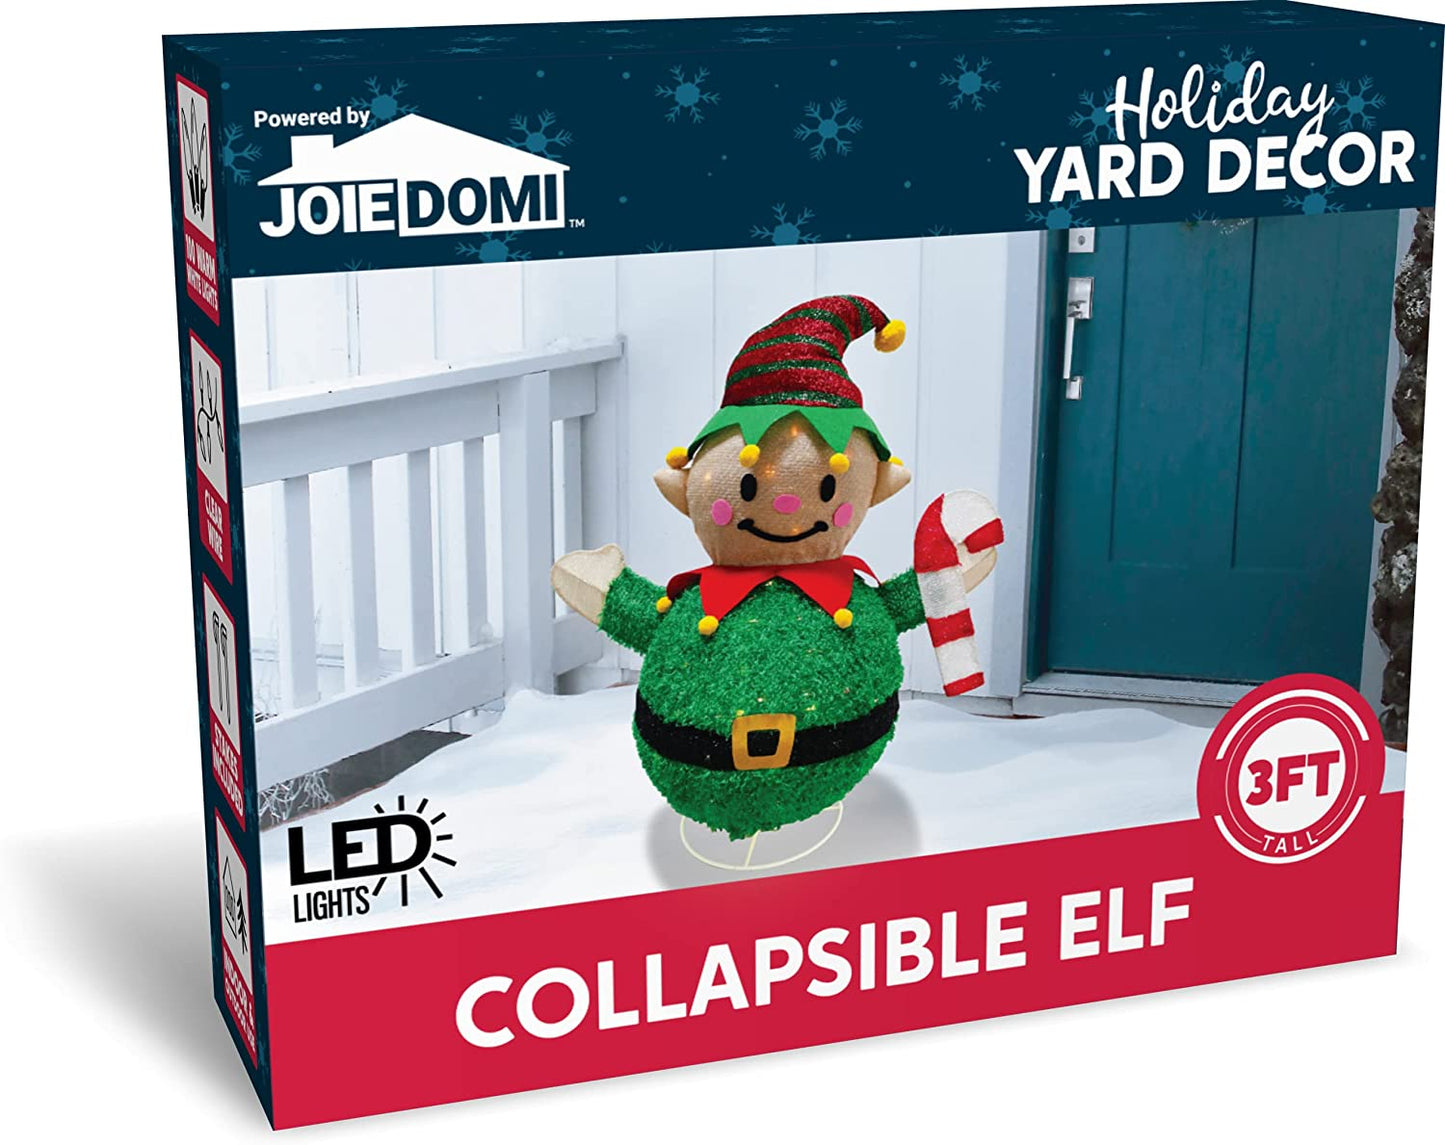 3 FT Collapsible Elf LED Yard Light